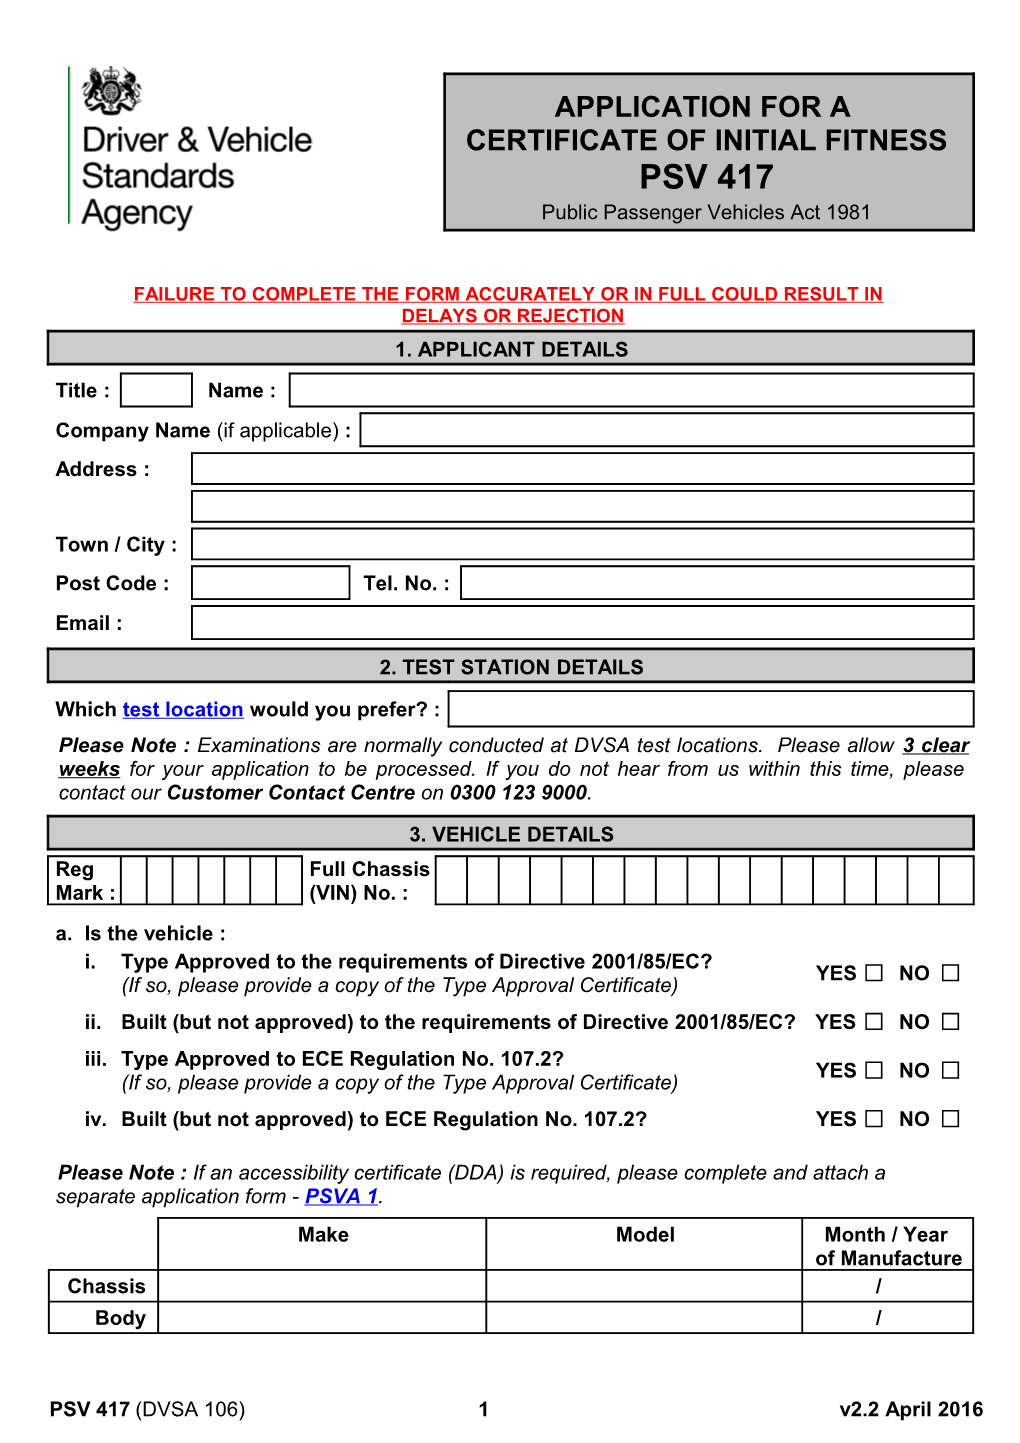 Application for a Certificate of Initial Fitness PSV 417